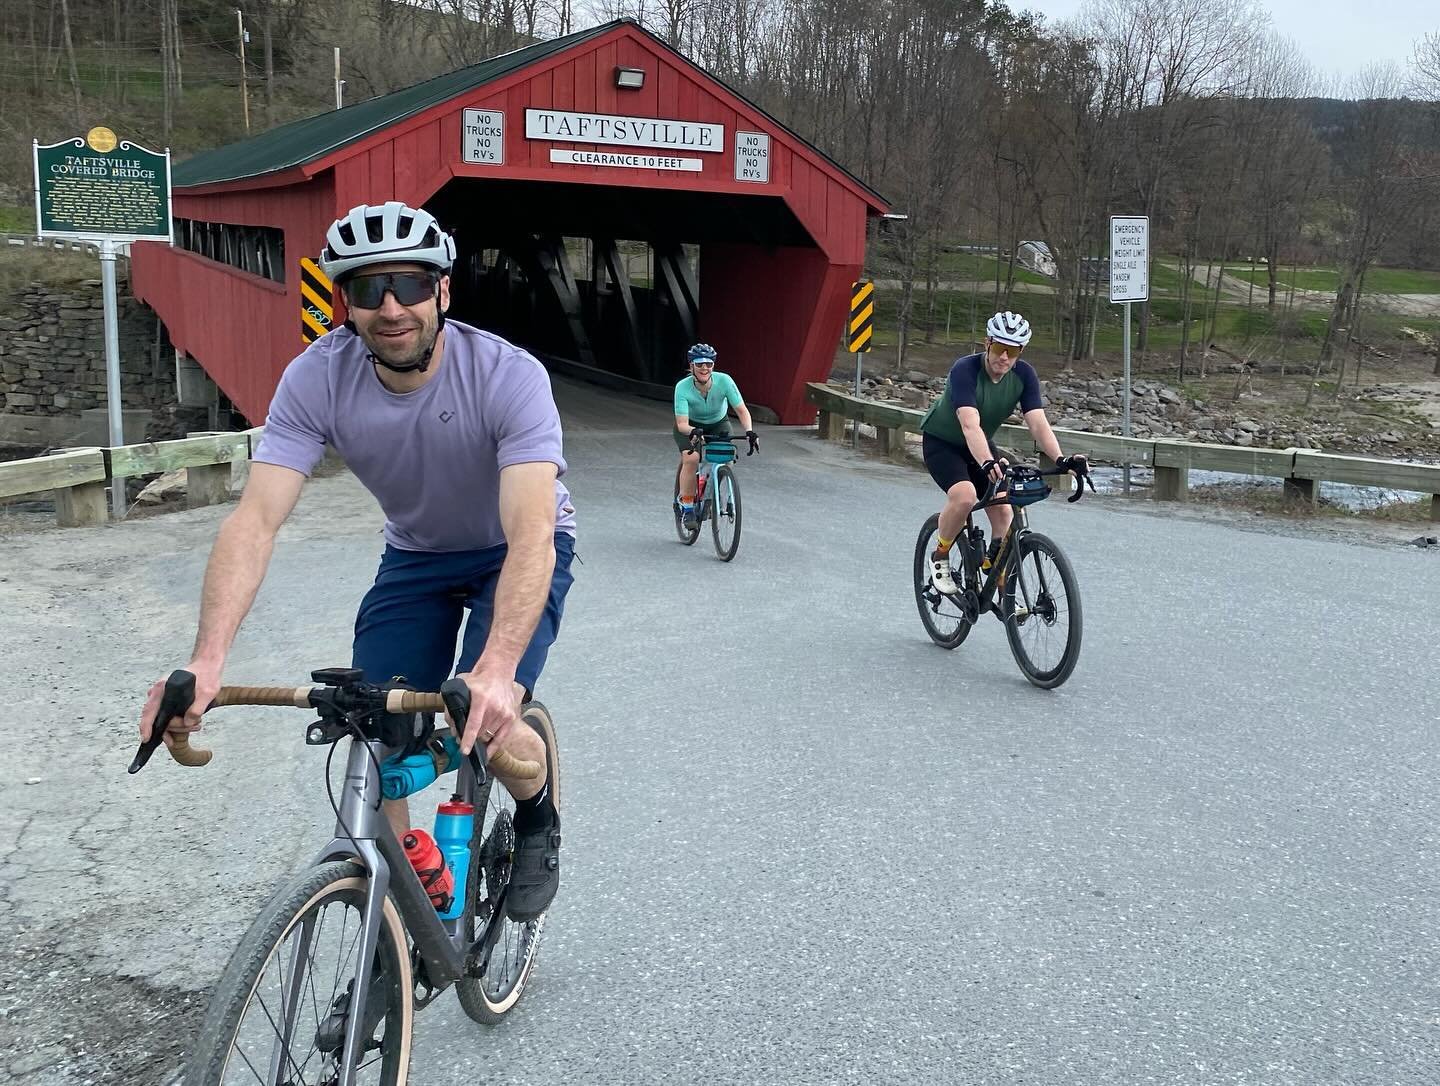 What a day for our @therangervt Woodstock pre-ride! Great people, great weather, great routes. 

And thanks to the sponsors who made it possible: @ranchcampvt, @argon18bike, @mtbvermont